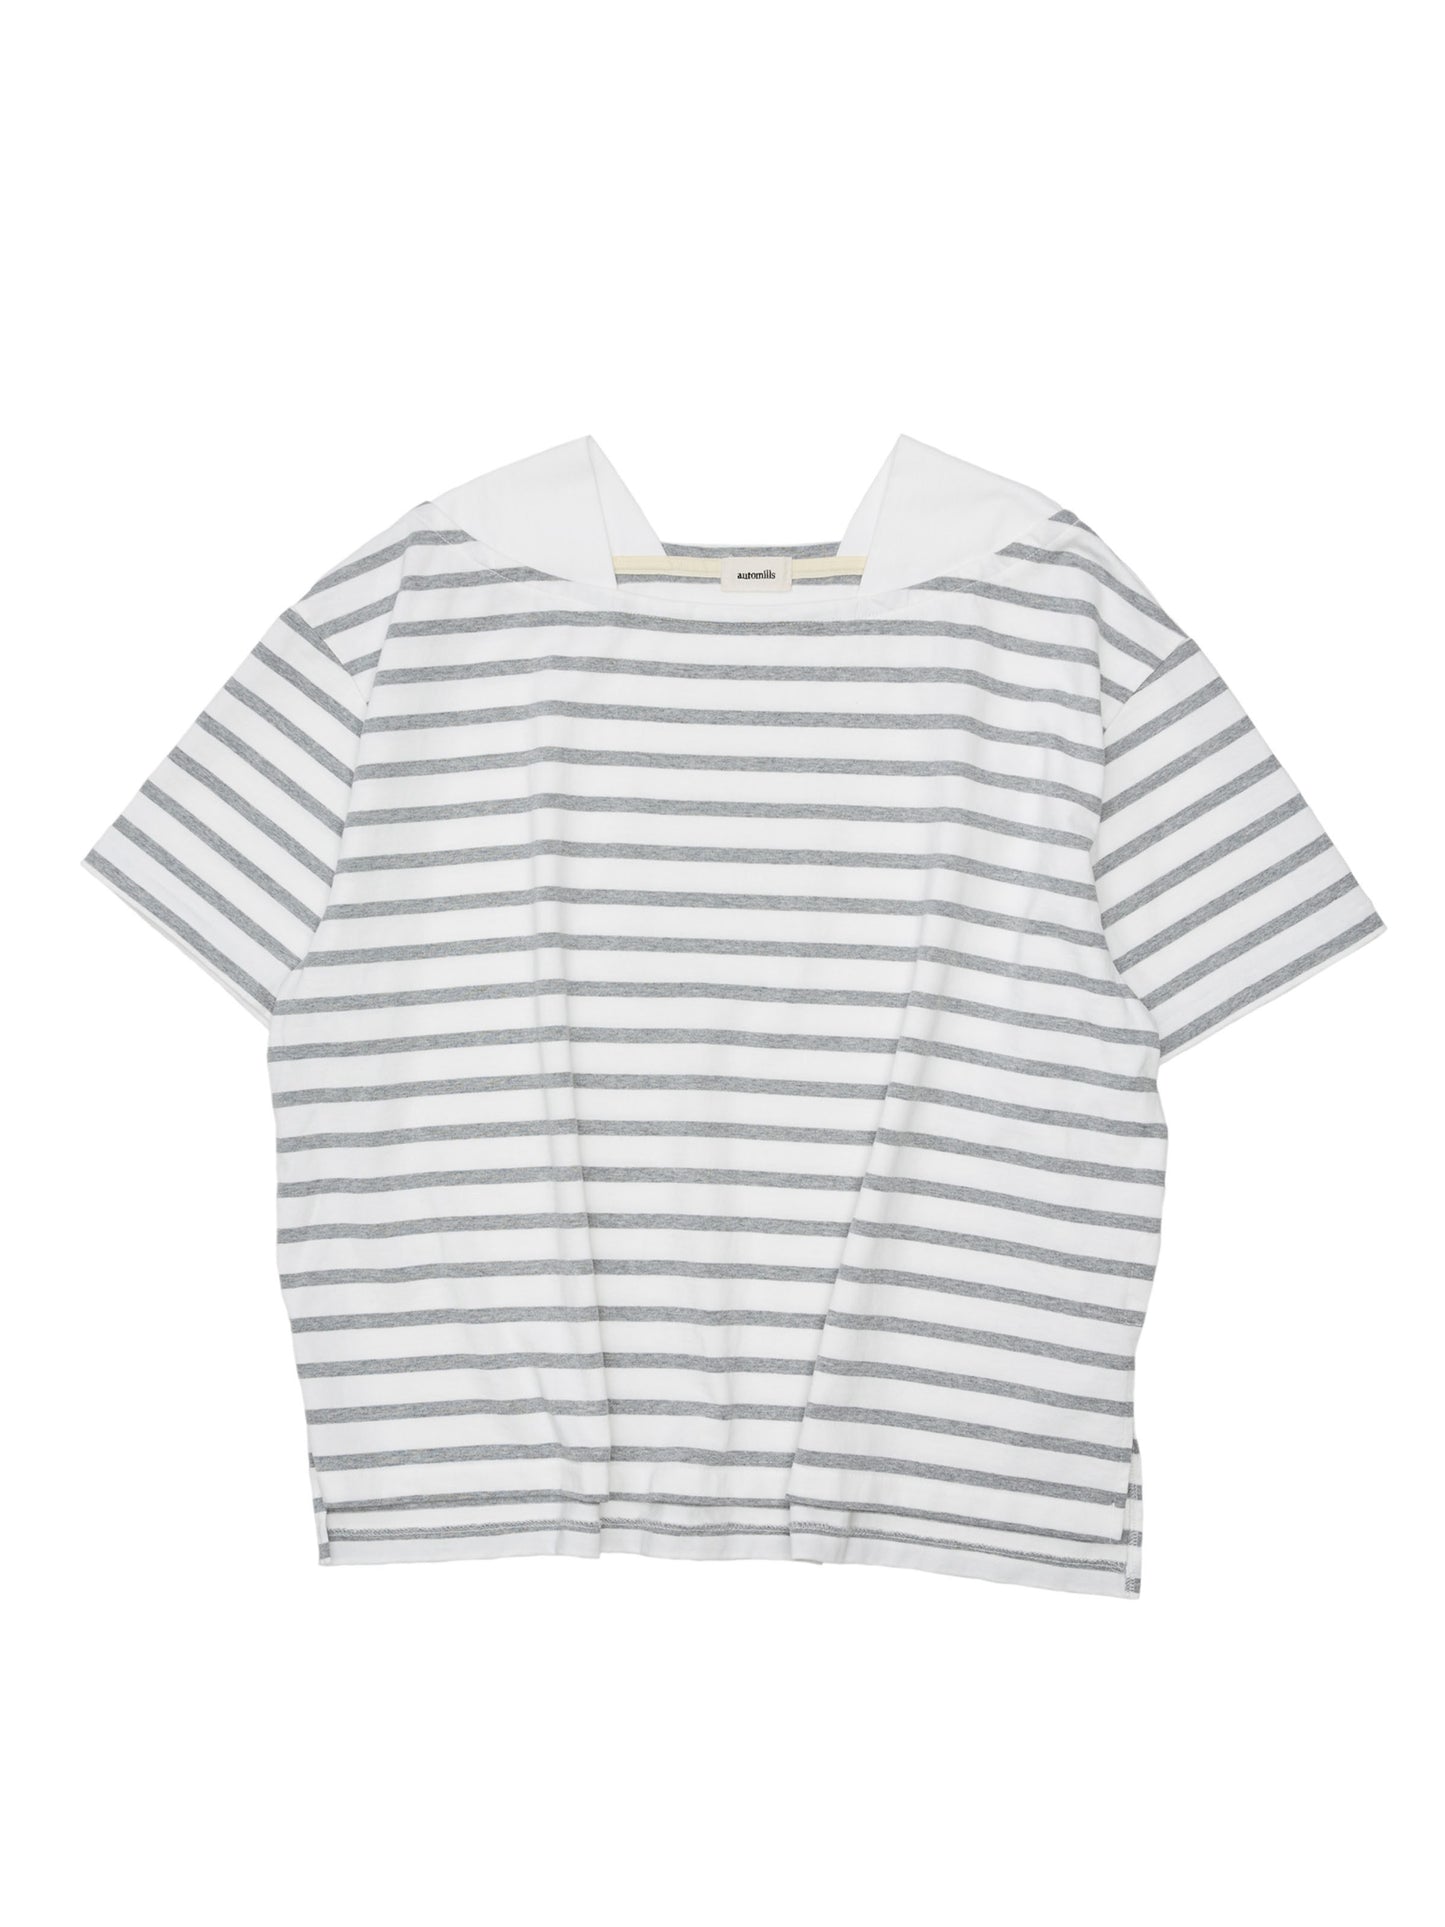 BAGGY BOAT S/S TEE COTTON BORDER JERSEY AM-C0202 White/Gray